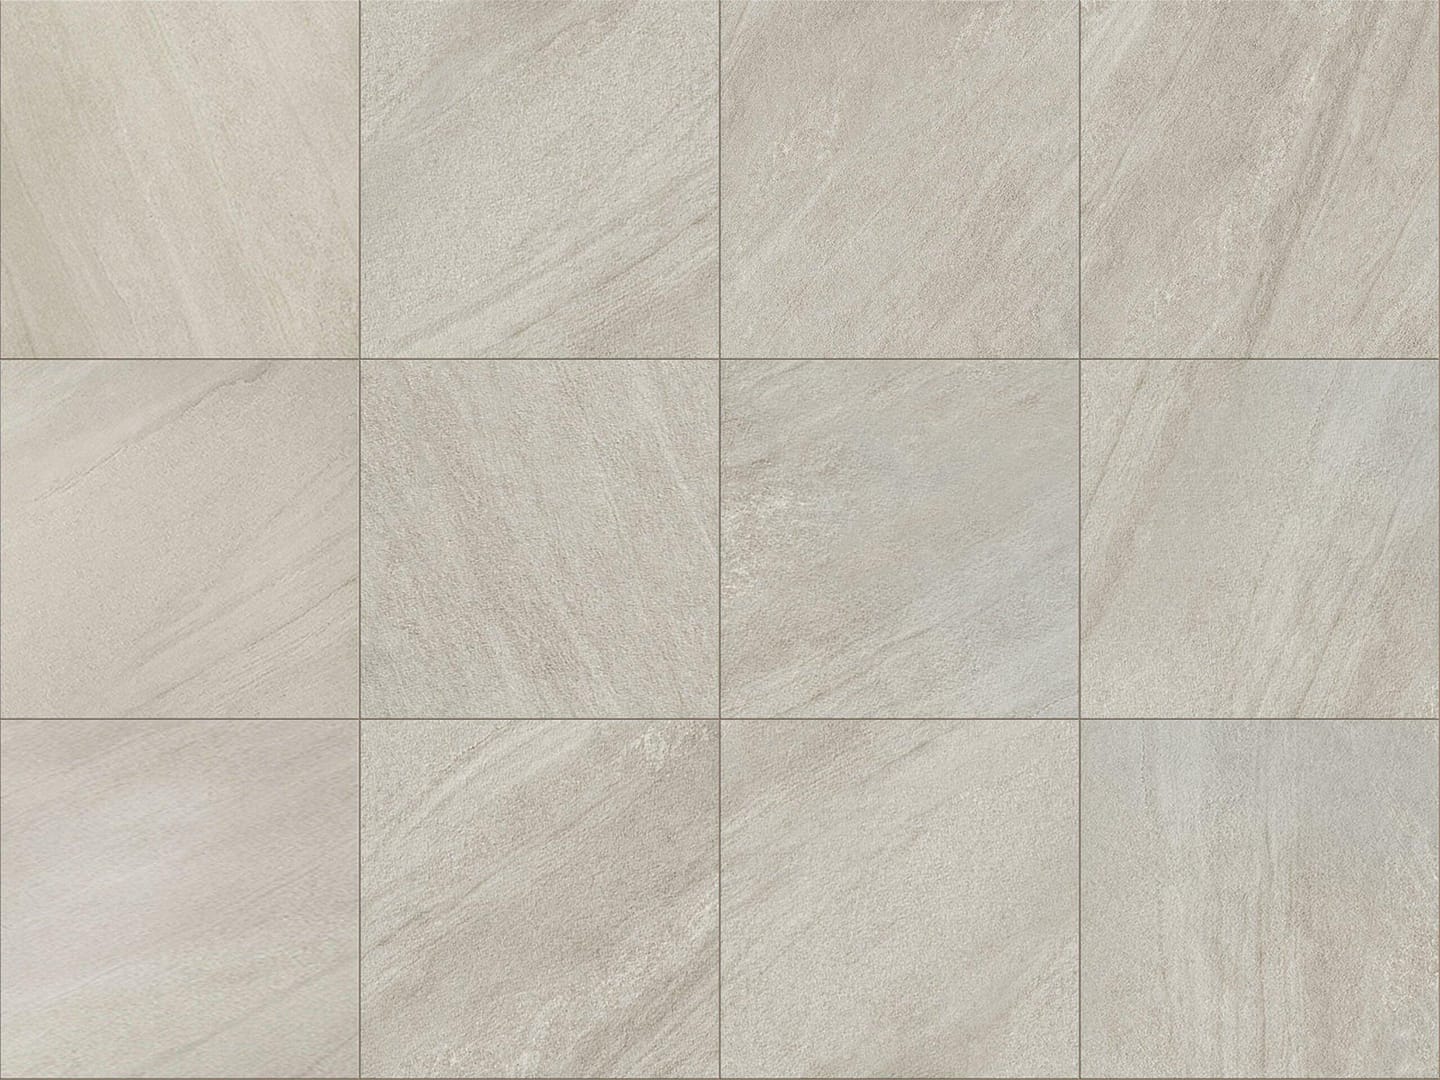 Discover Stylish Floor Tiles for Sale: Transform Your Space Today